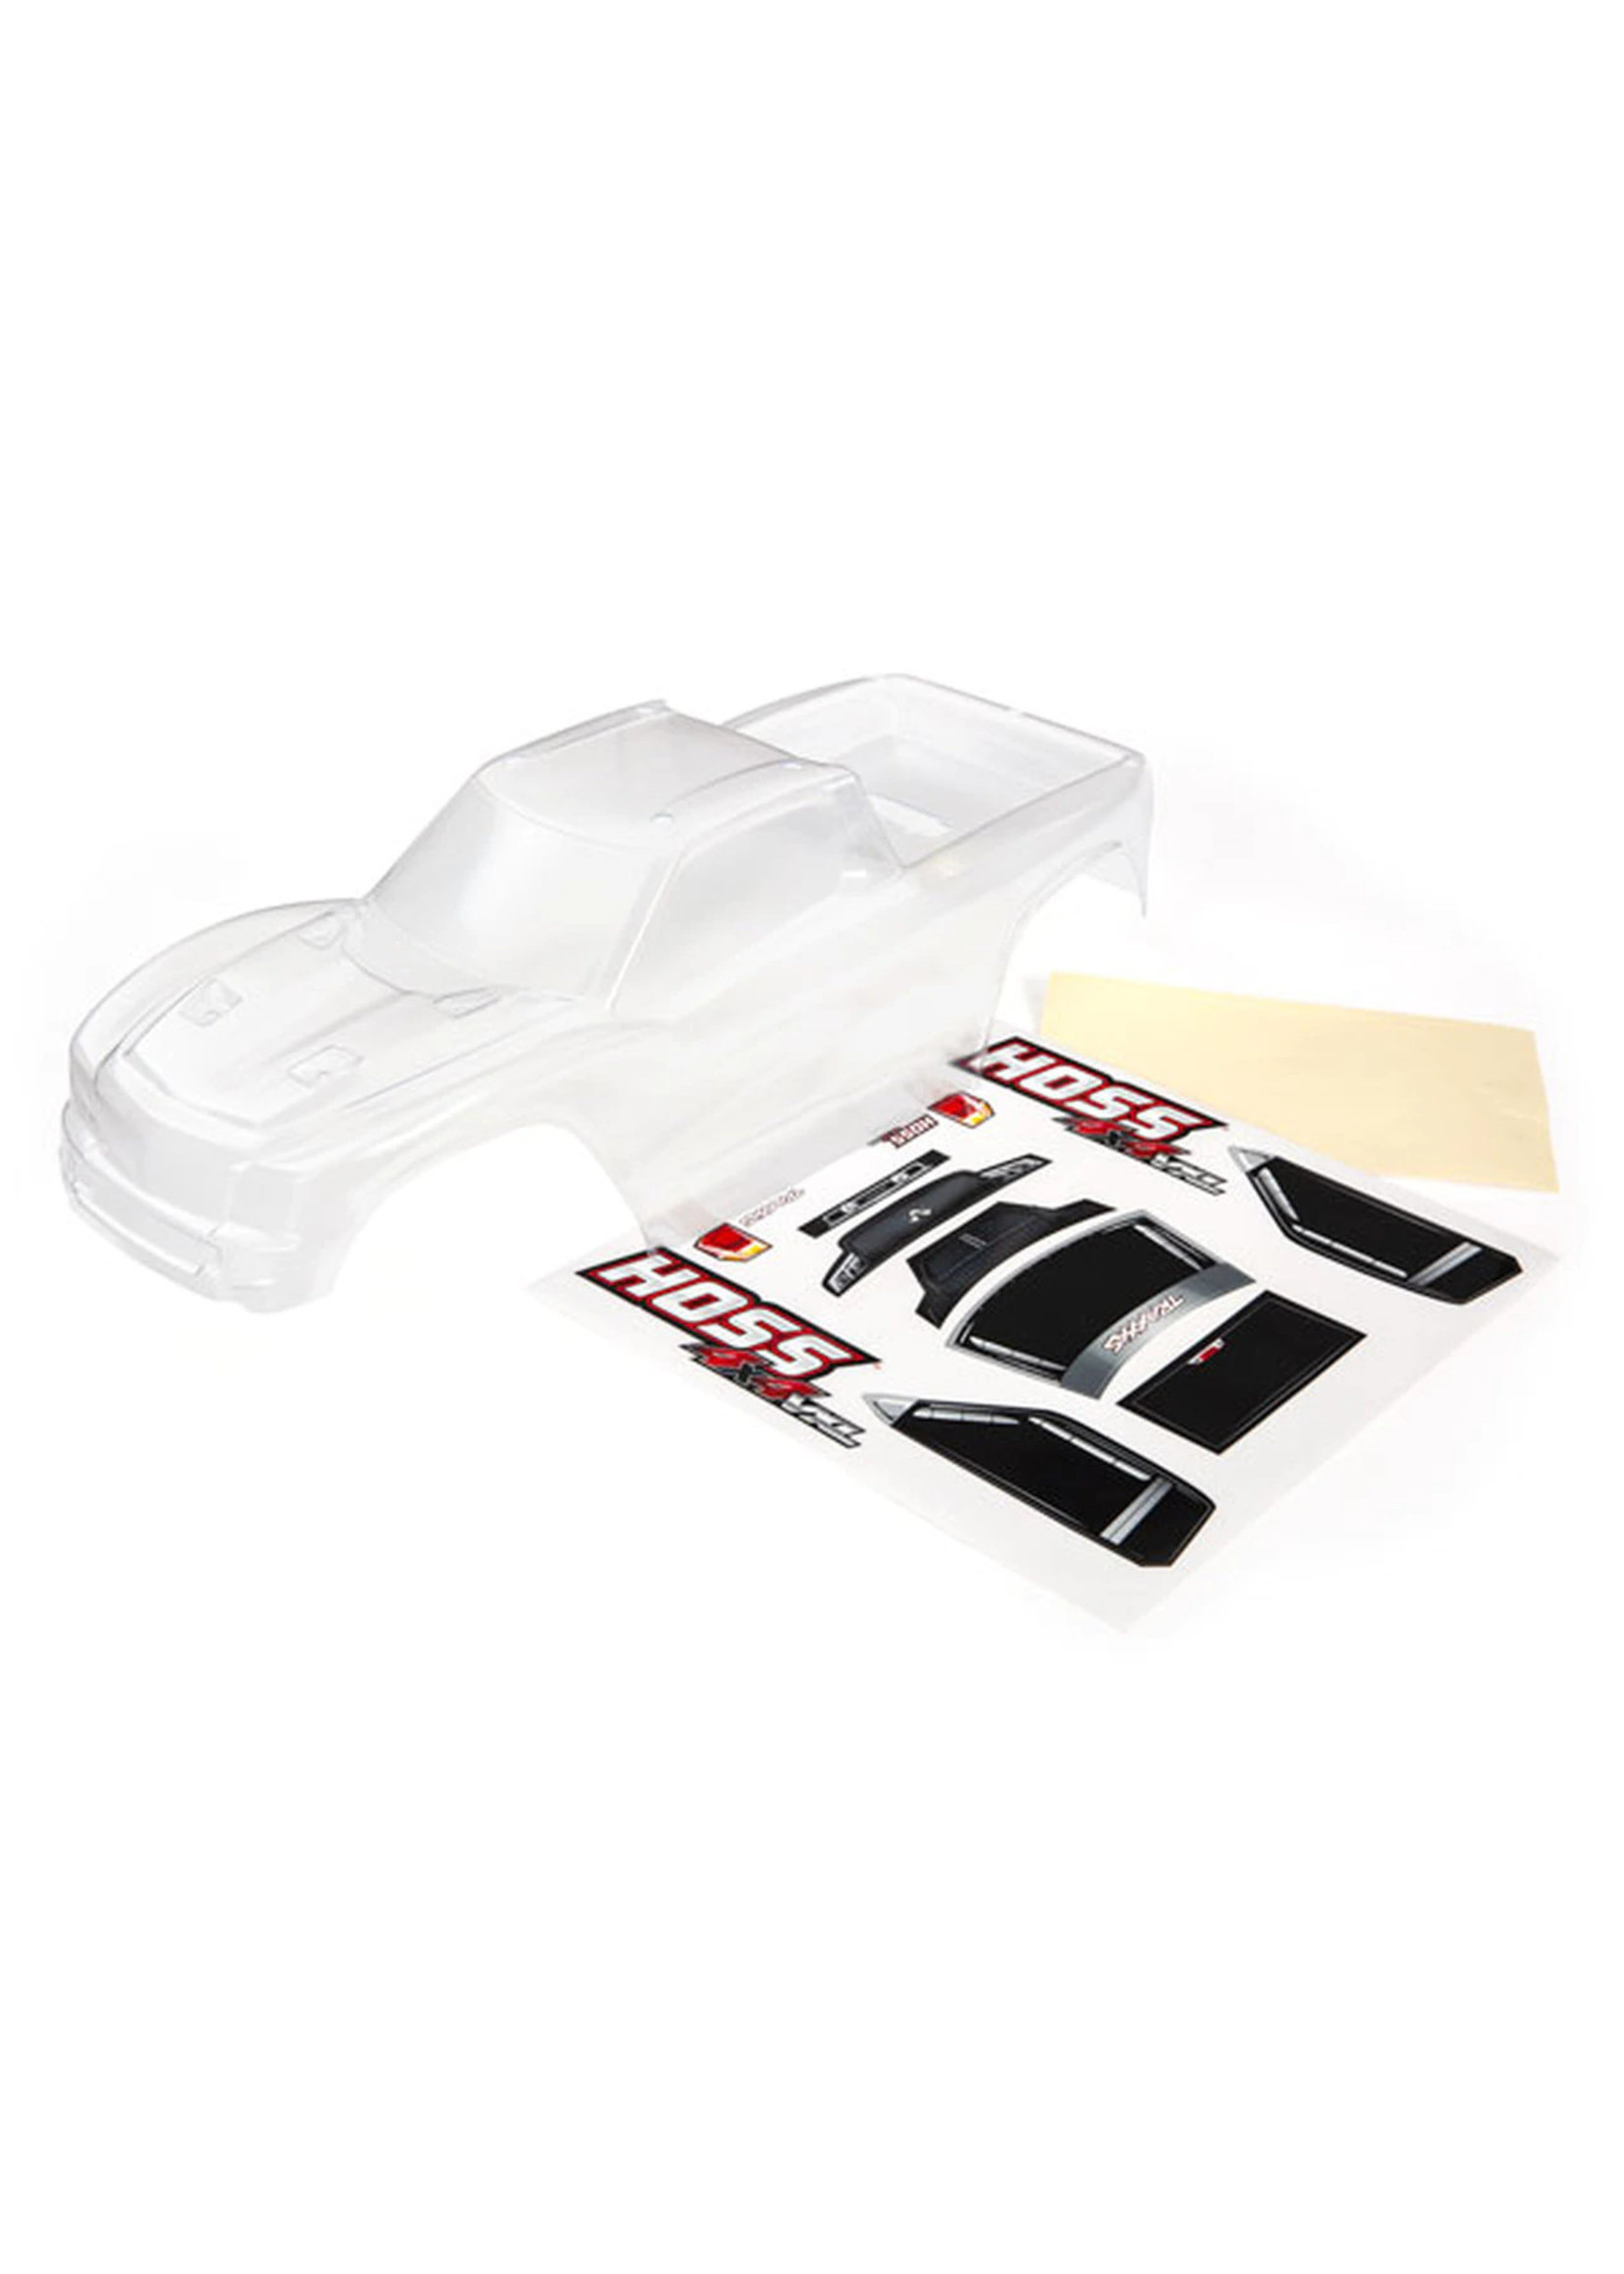 Traxxas 9011 - Hoss 4x4 Body with Decal Set - Clear